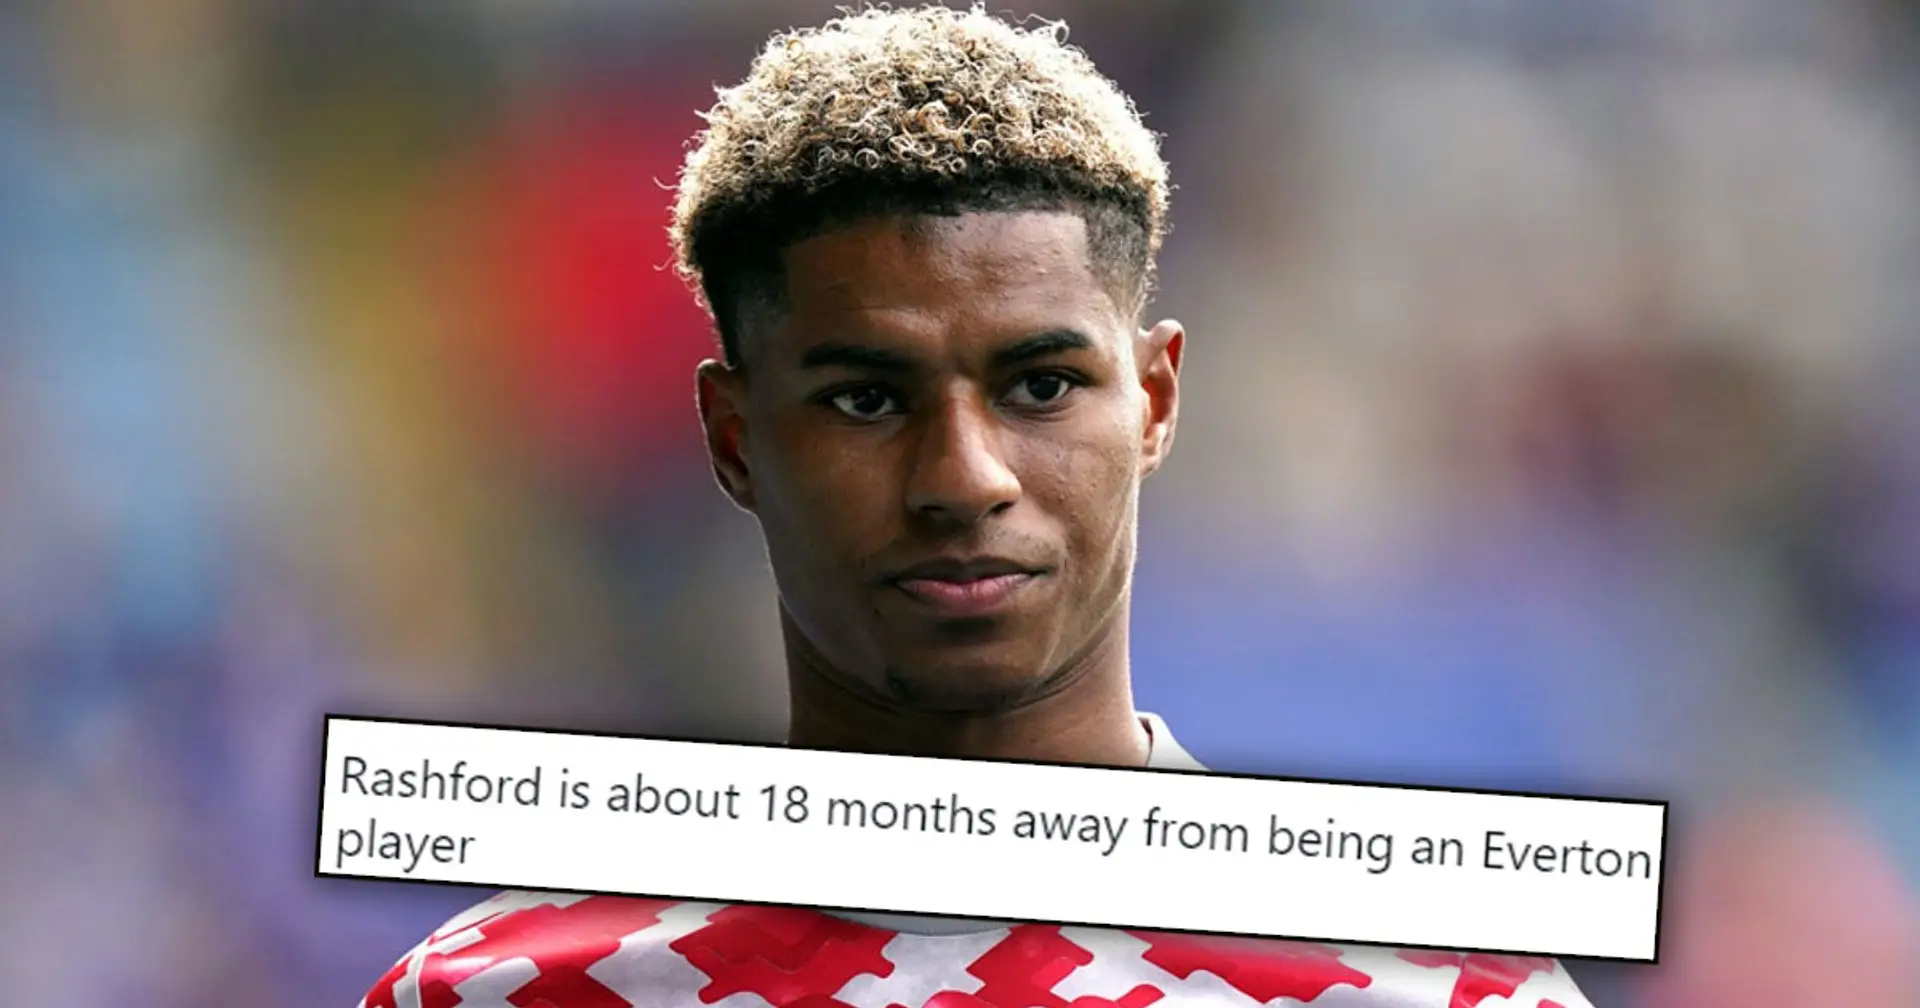 '18 months away from being an Everton player': Man United fans discuss Rashford’s future